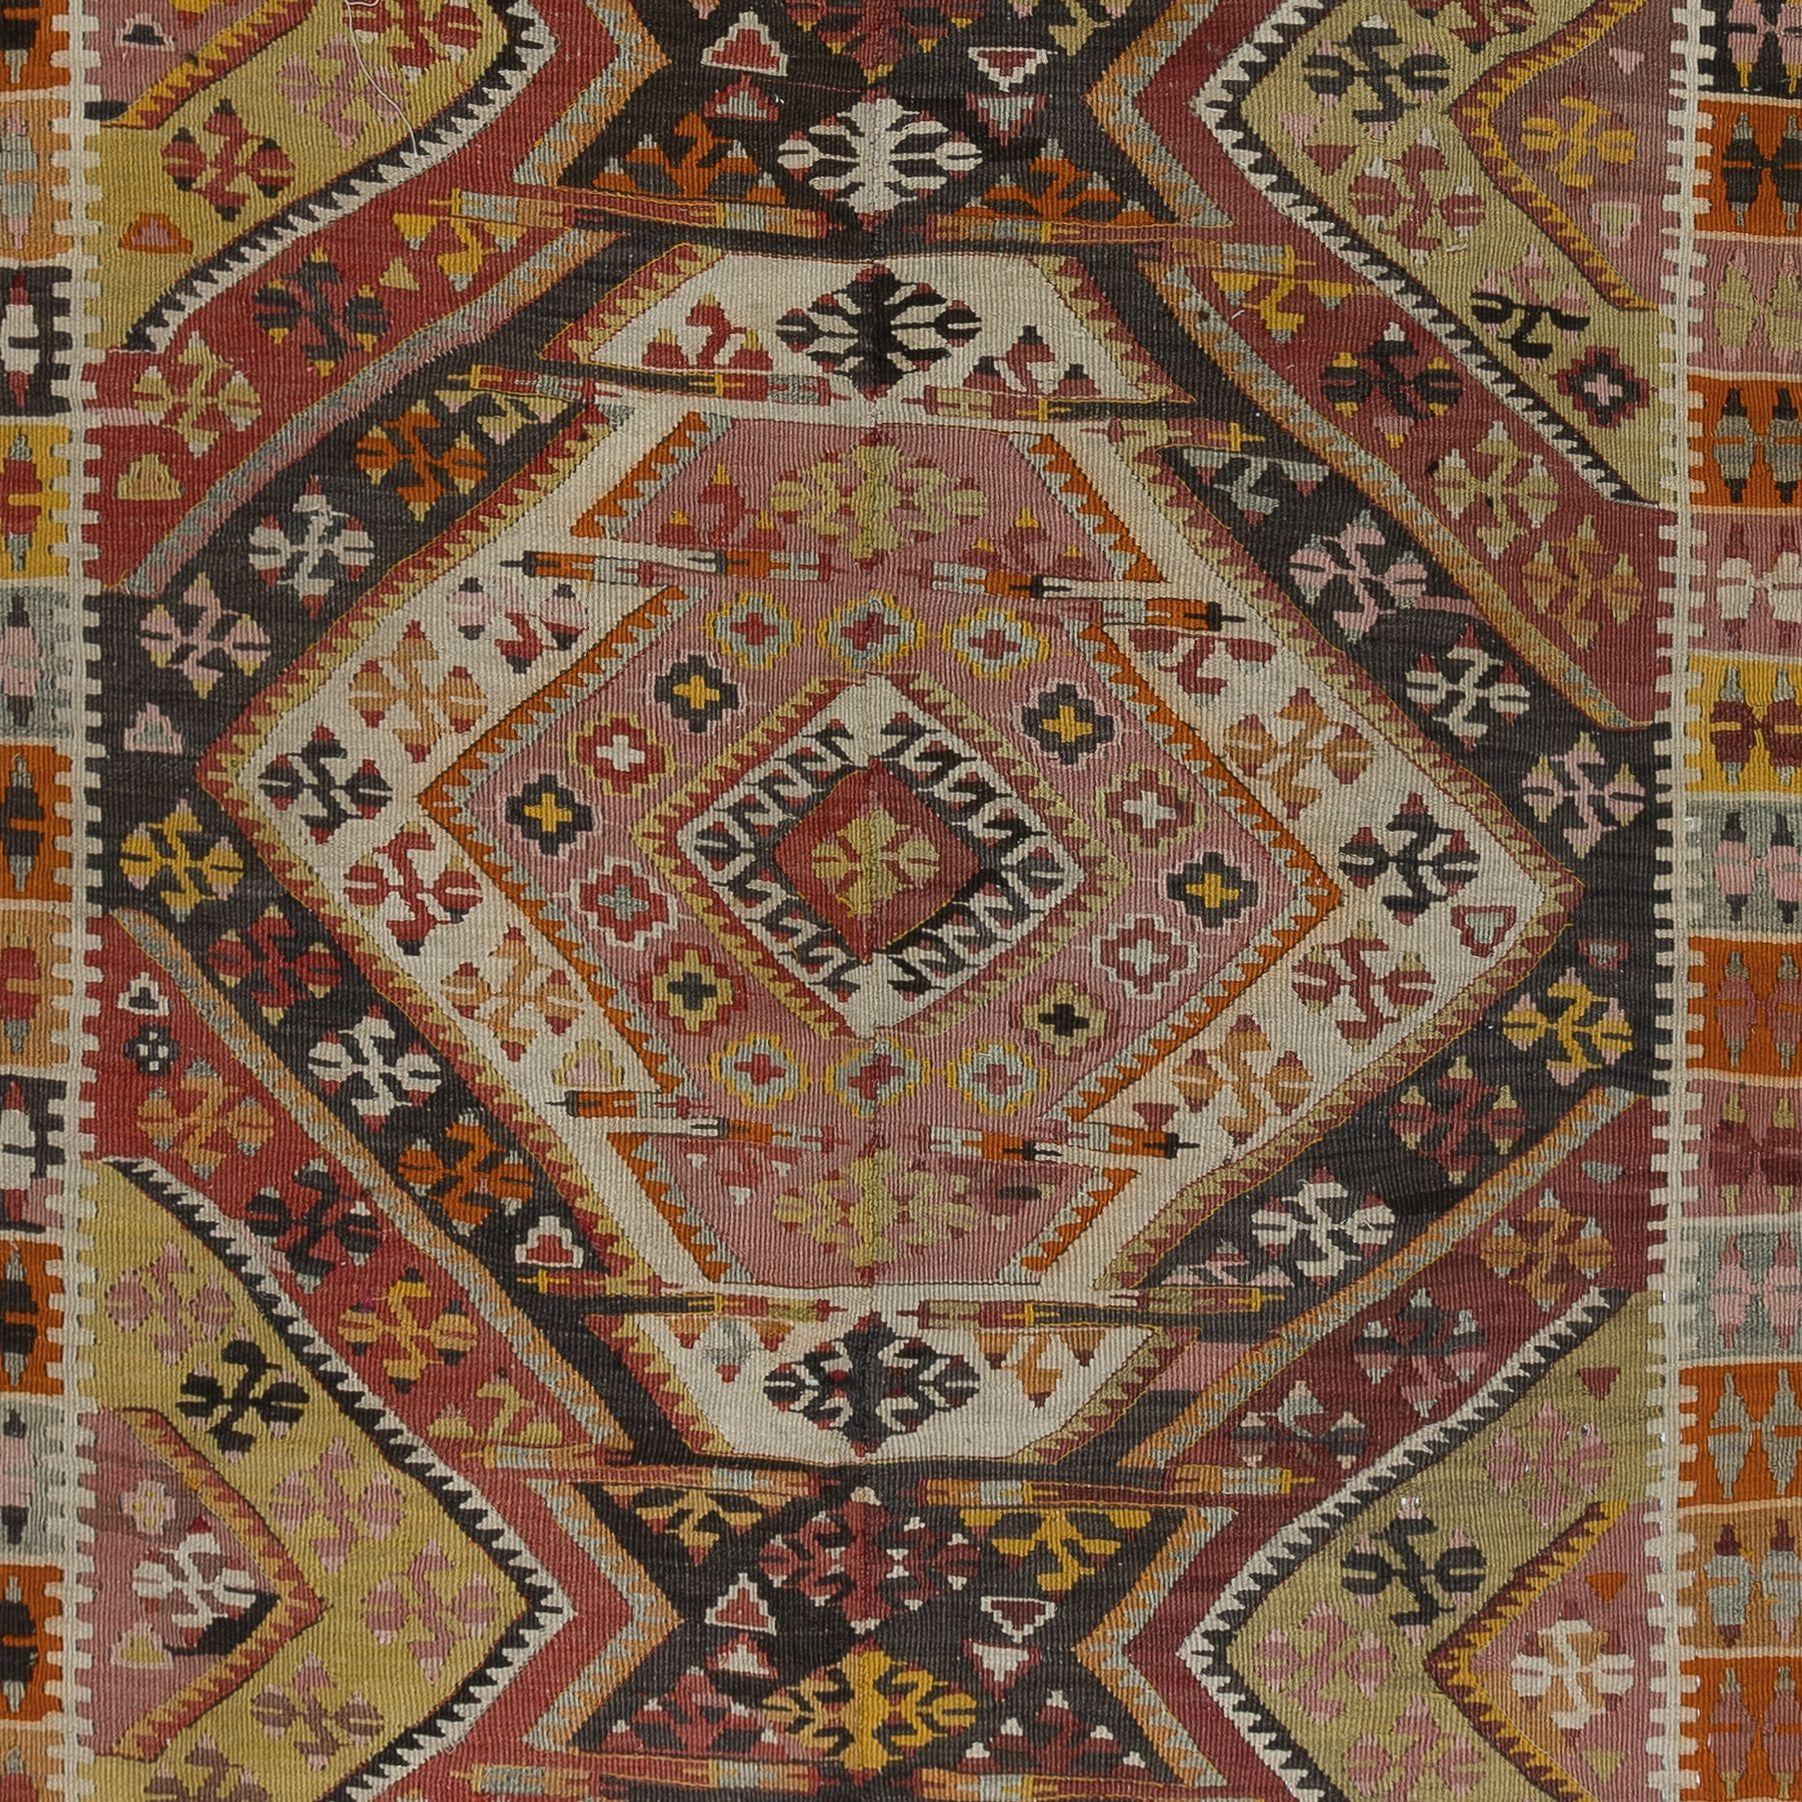 Hand-Woven 5x9.2 Ft Nomadic Vintage Anatolian Kilim, Flat-Weave Colorful Rug, All Wool For Sale